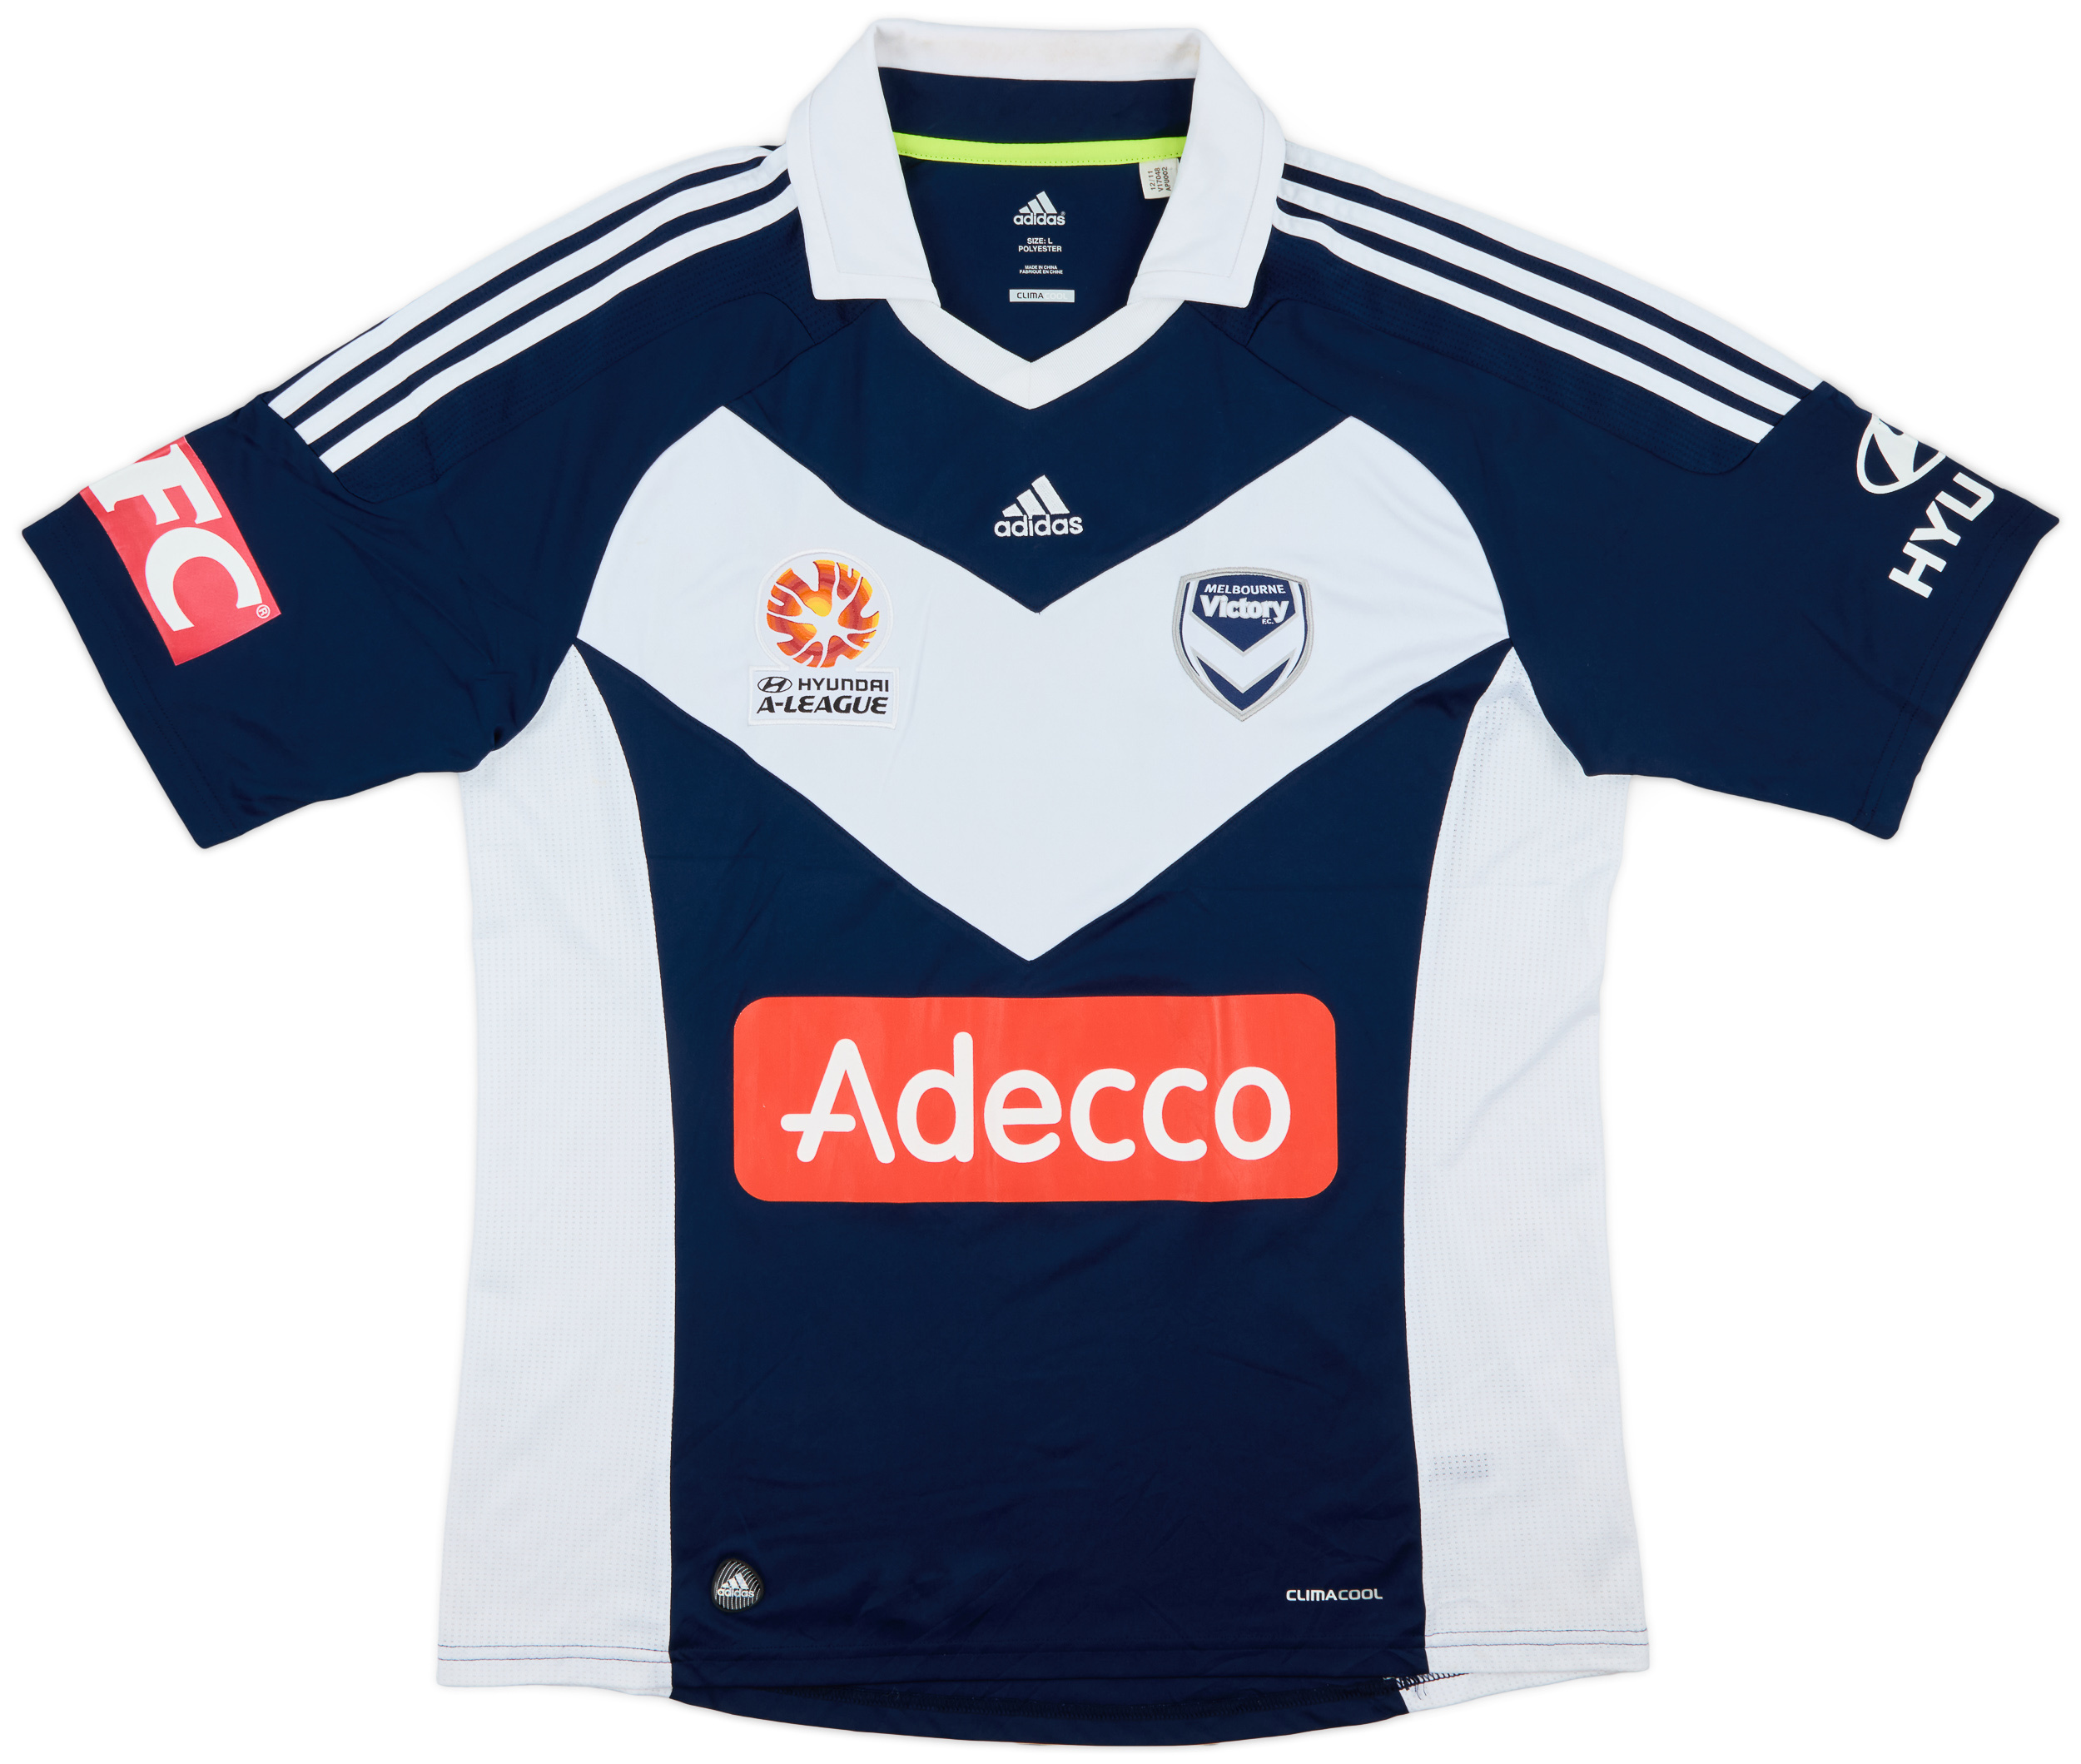 2011-13 Melbourne Victory Home Shirt - 8/10 - ()